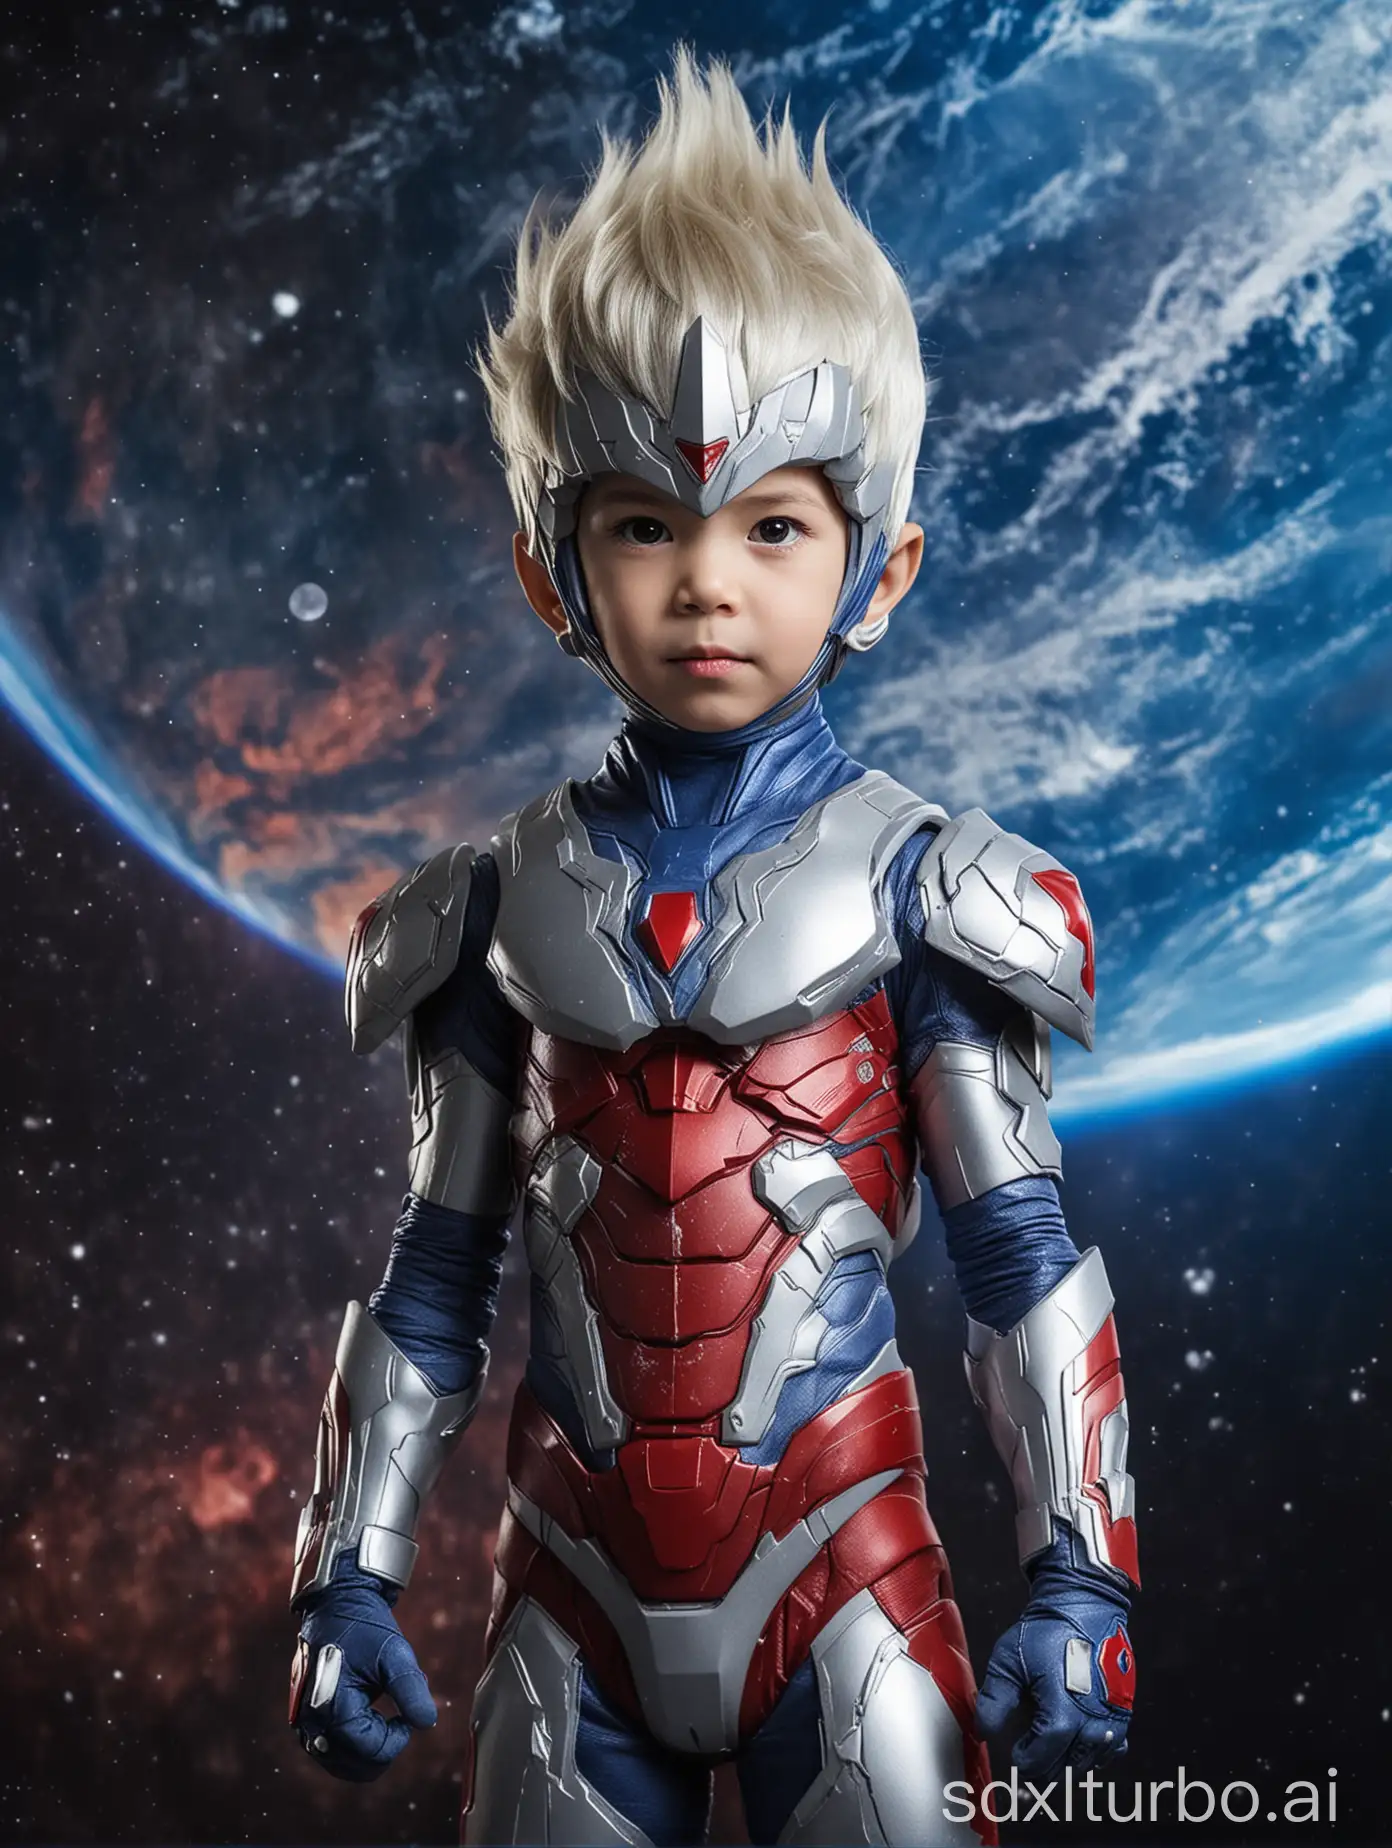 a 6-year-old little boy, transform into Ultraman, cosplay costume material, can see the face and hair, background has a blue planet and aurora